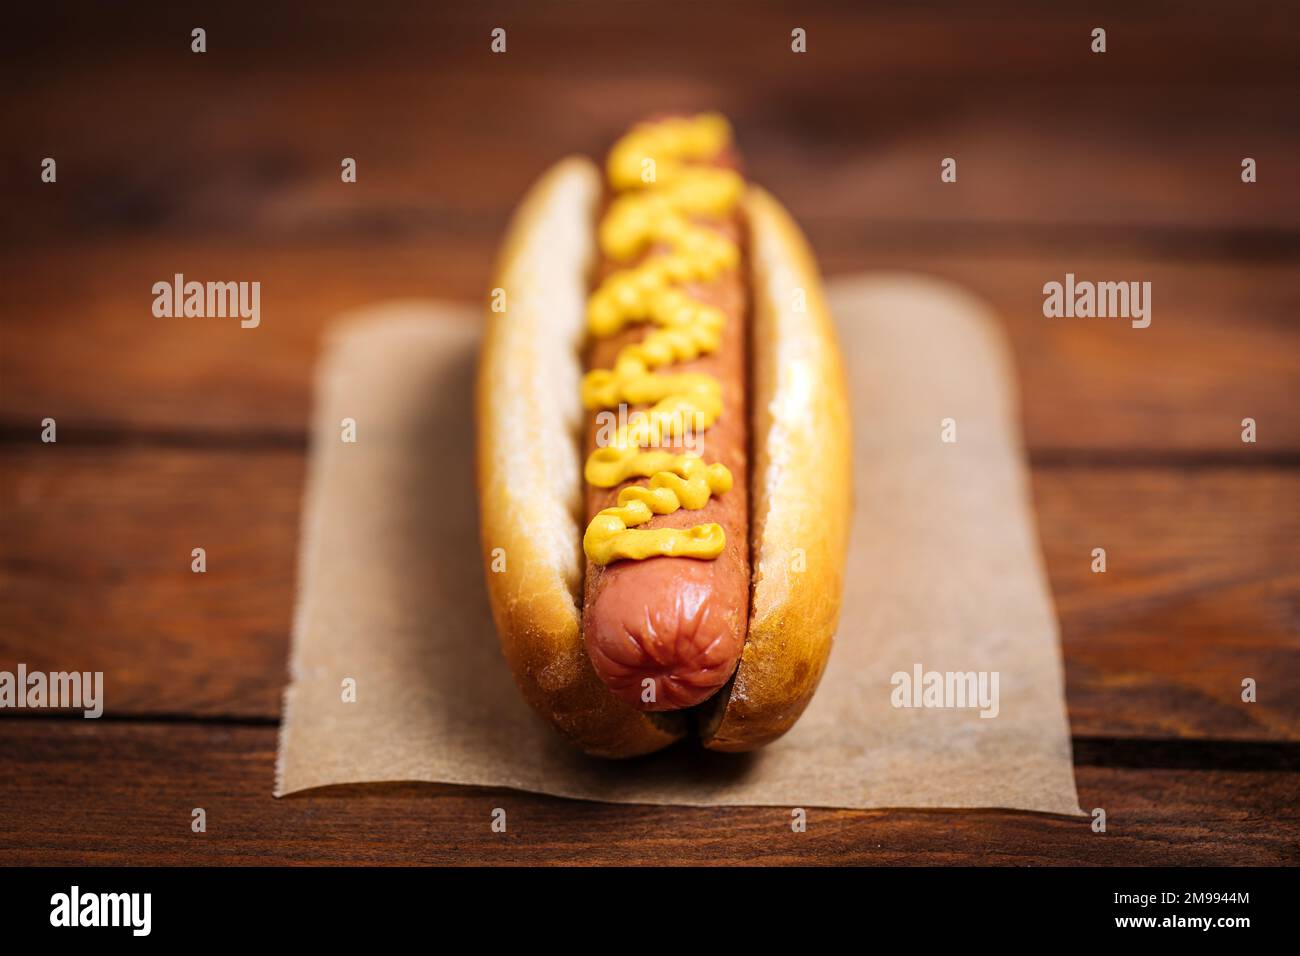 Classic fast food hot dog served with mustard on a rustic wooden board. Served with potato chips and sauces. Stock Photo